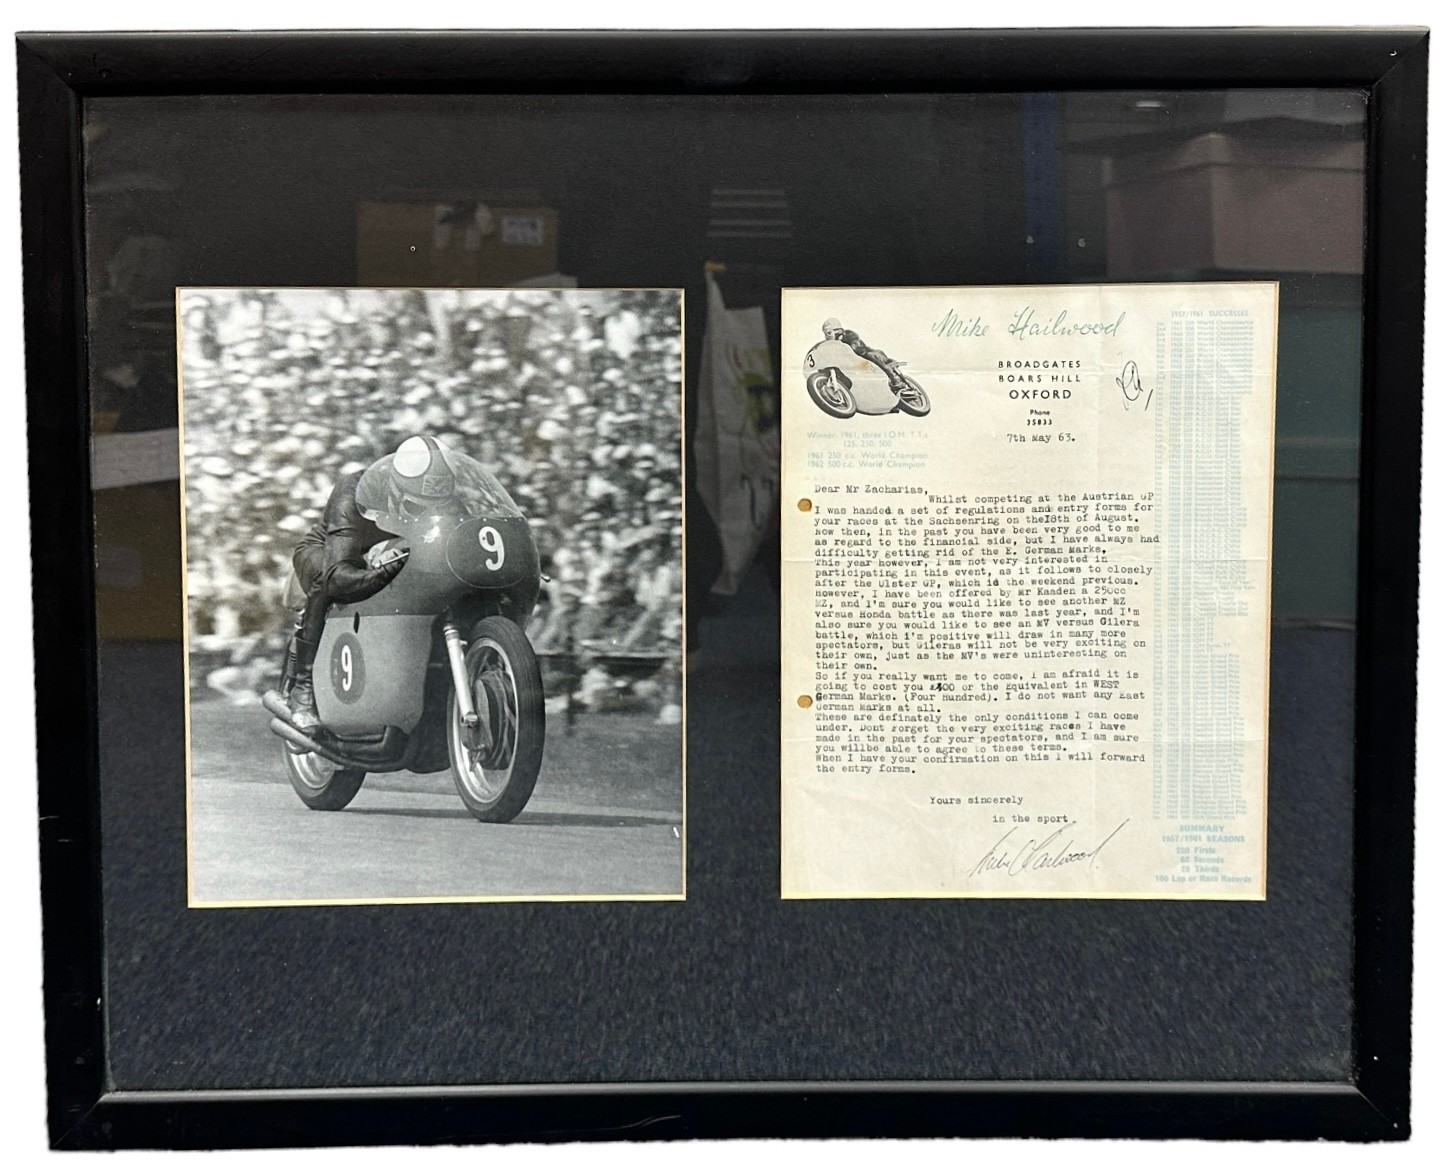 Framed Mike Hailwood signed letter. This letter dated 7th May 1963 is to a Mr. Zacharias owner of